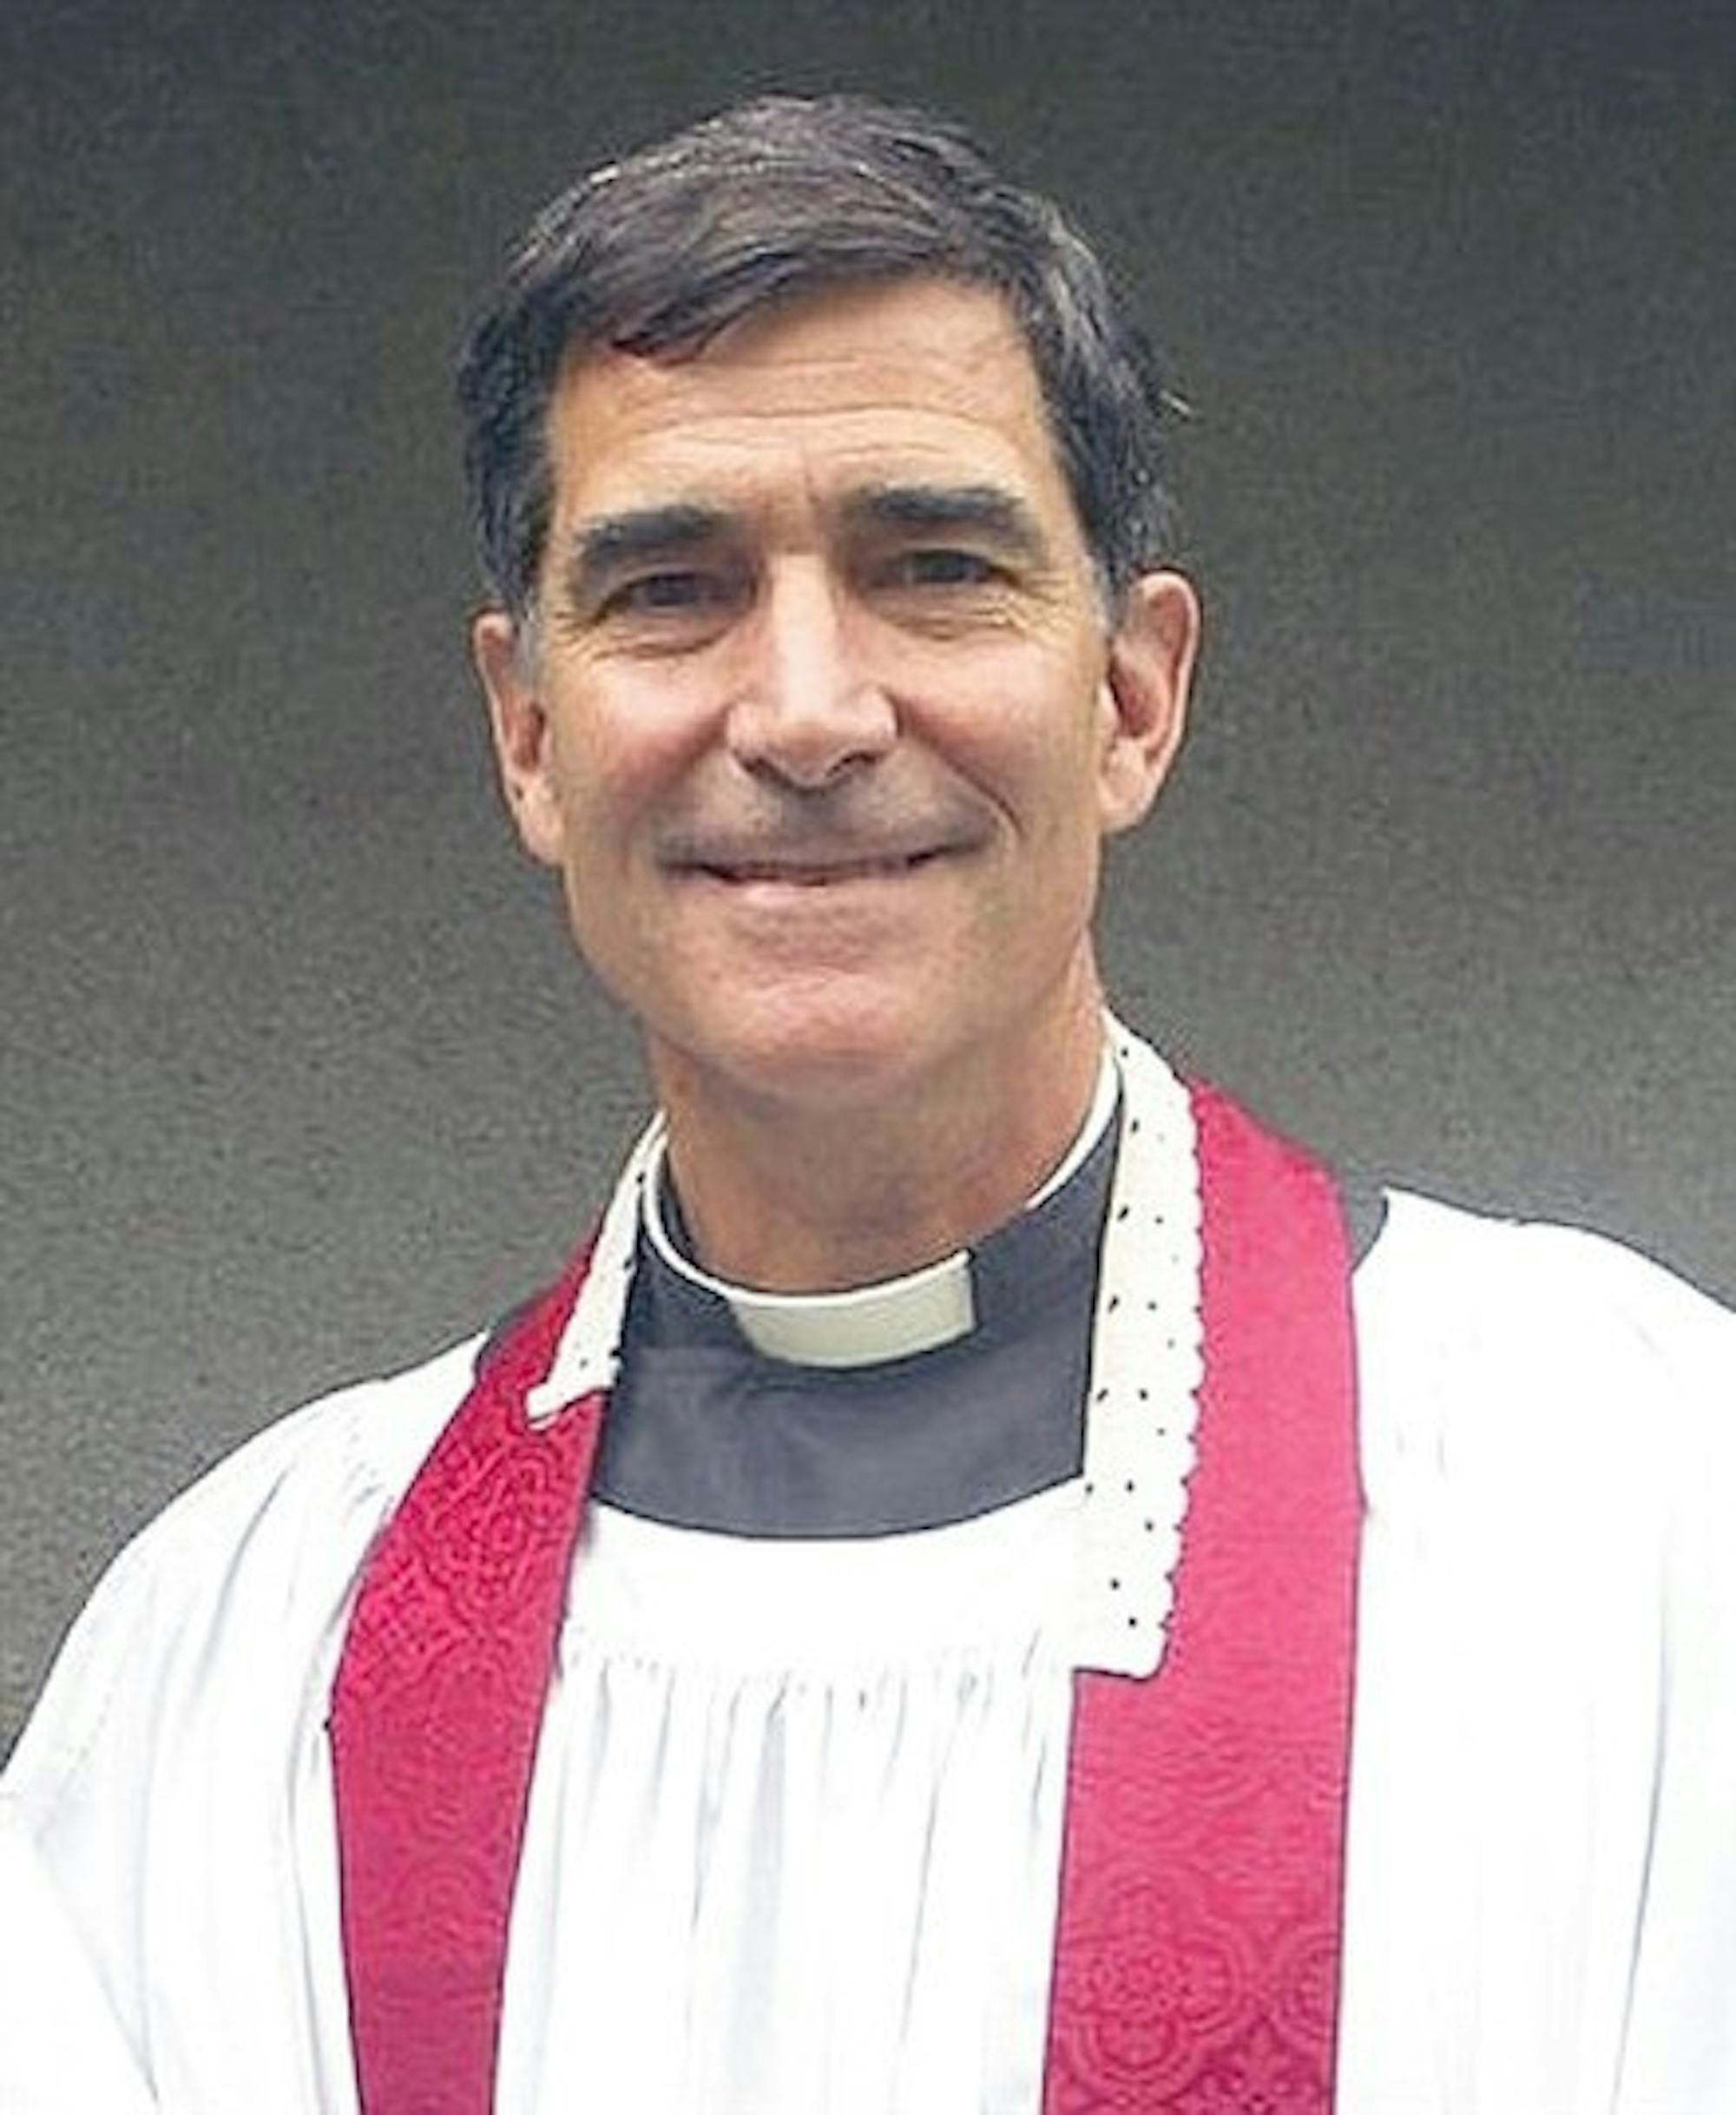 The Rev. Robert Hirschfeld '83 was selected as the 10th Episcopal bishop of New Hampshire, succeeding the controversial Bishop Gene Robinson.